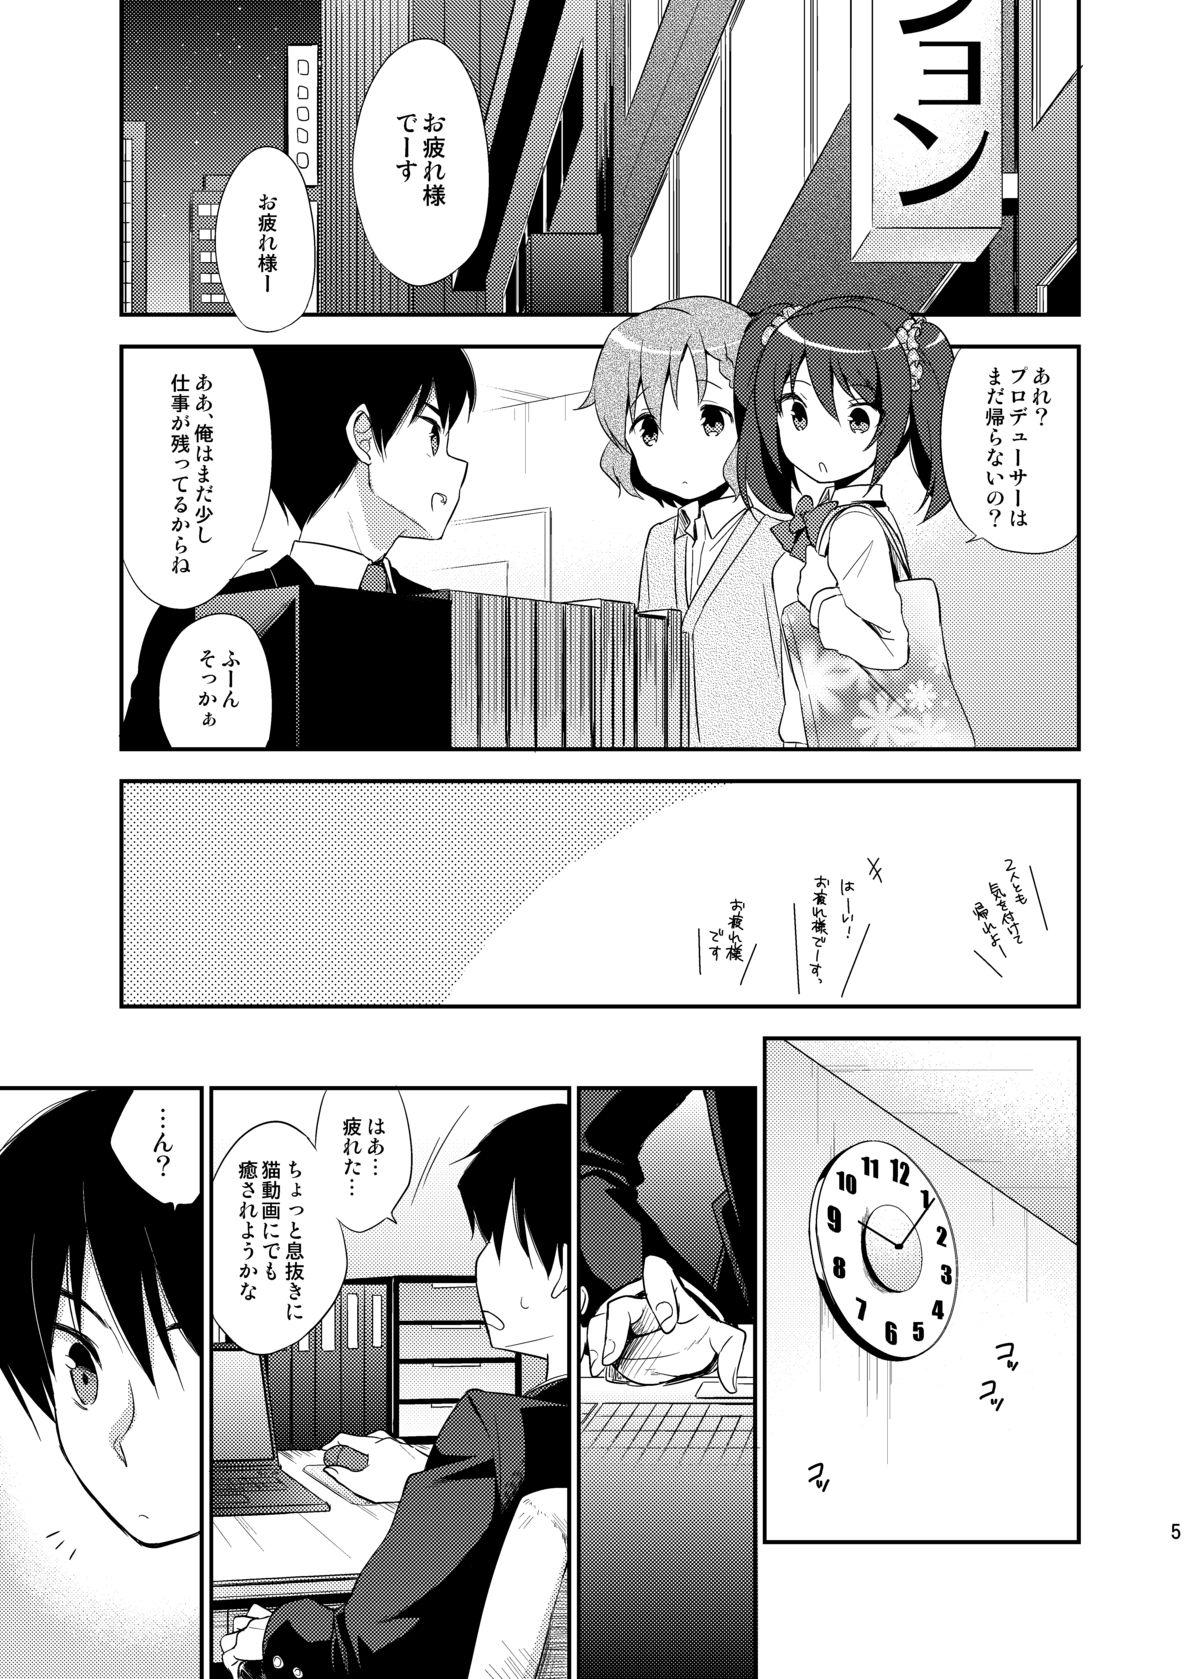 Morena Cafe MIX - The idolmaster Tanned - Page 4